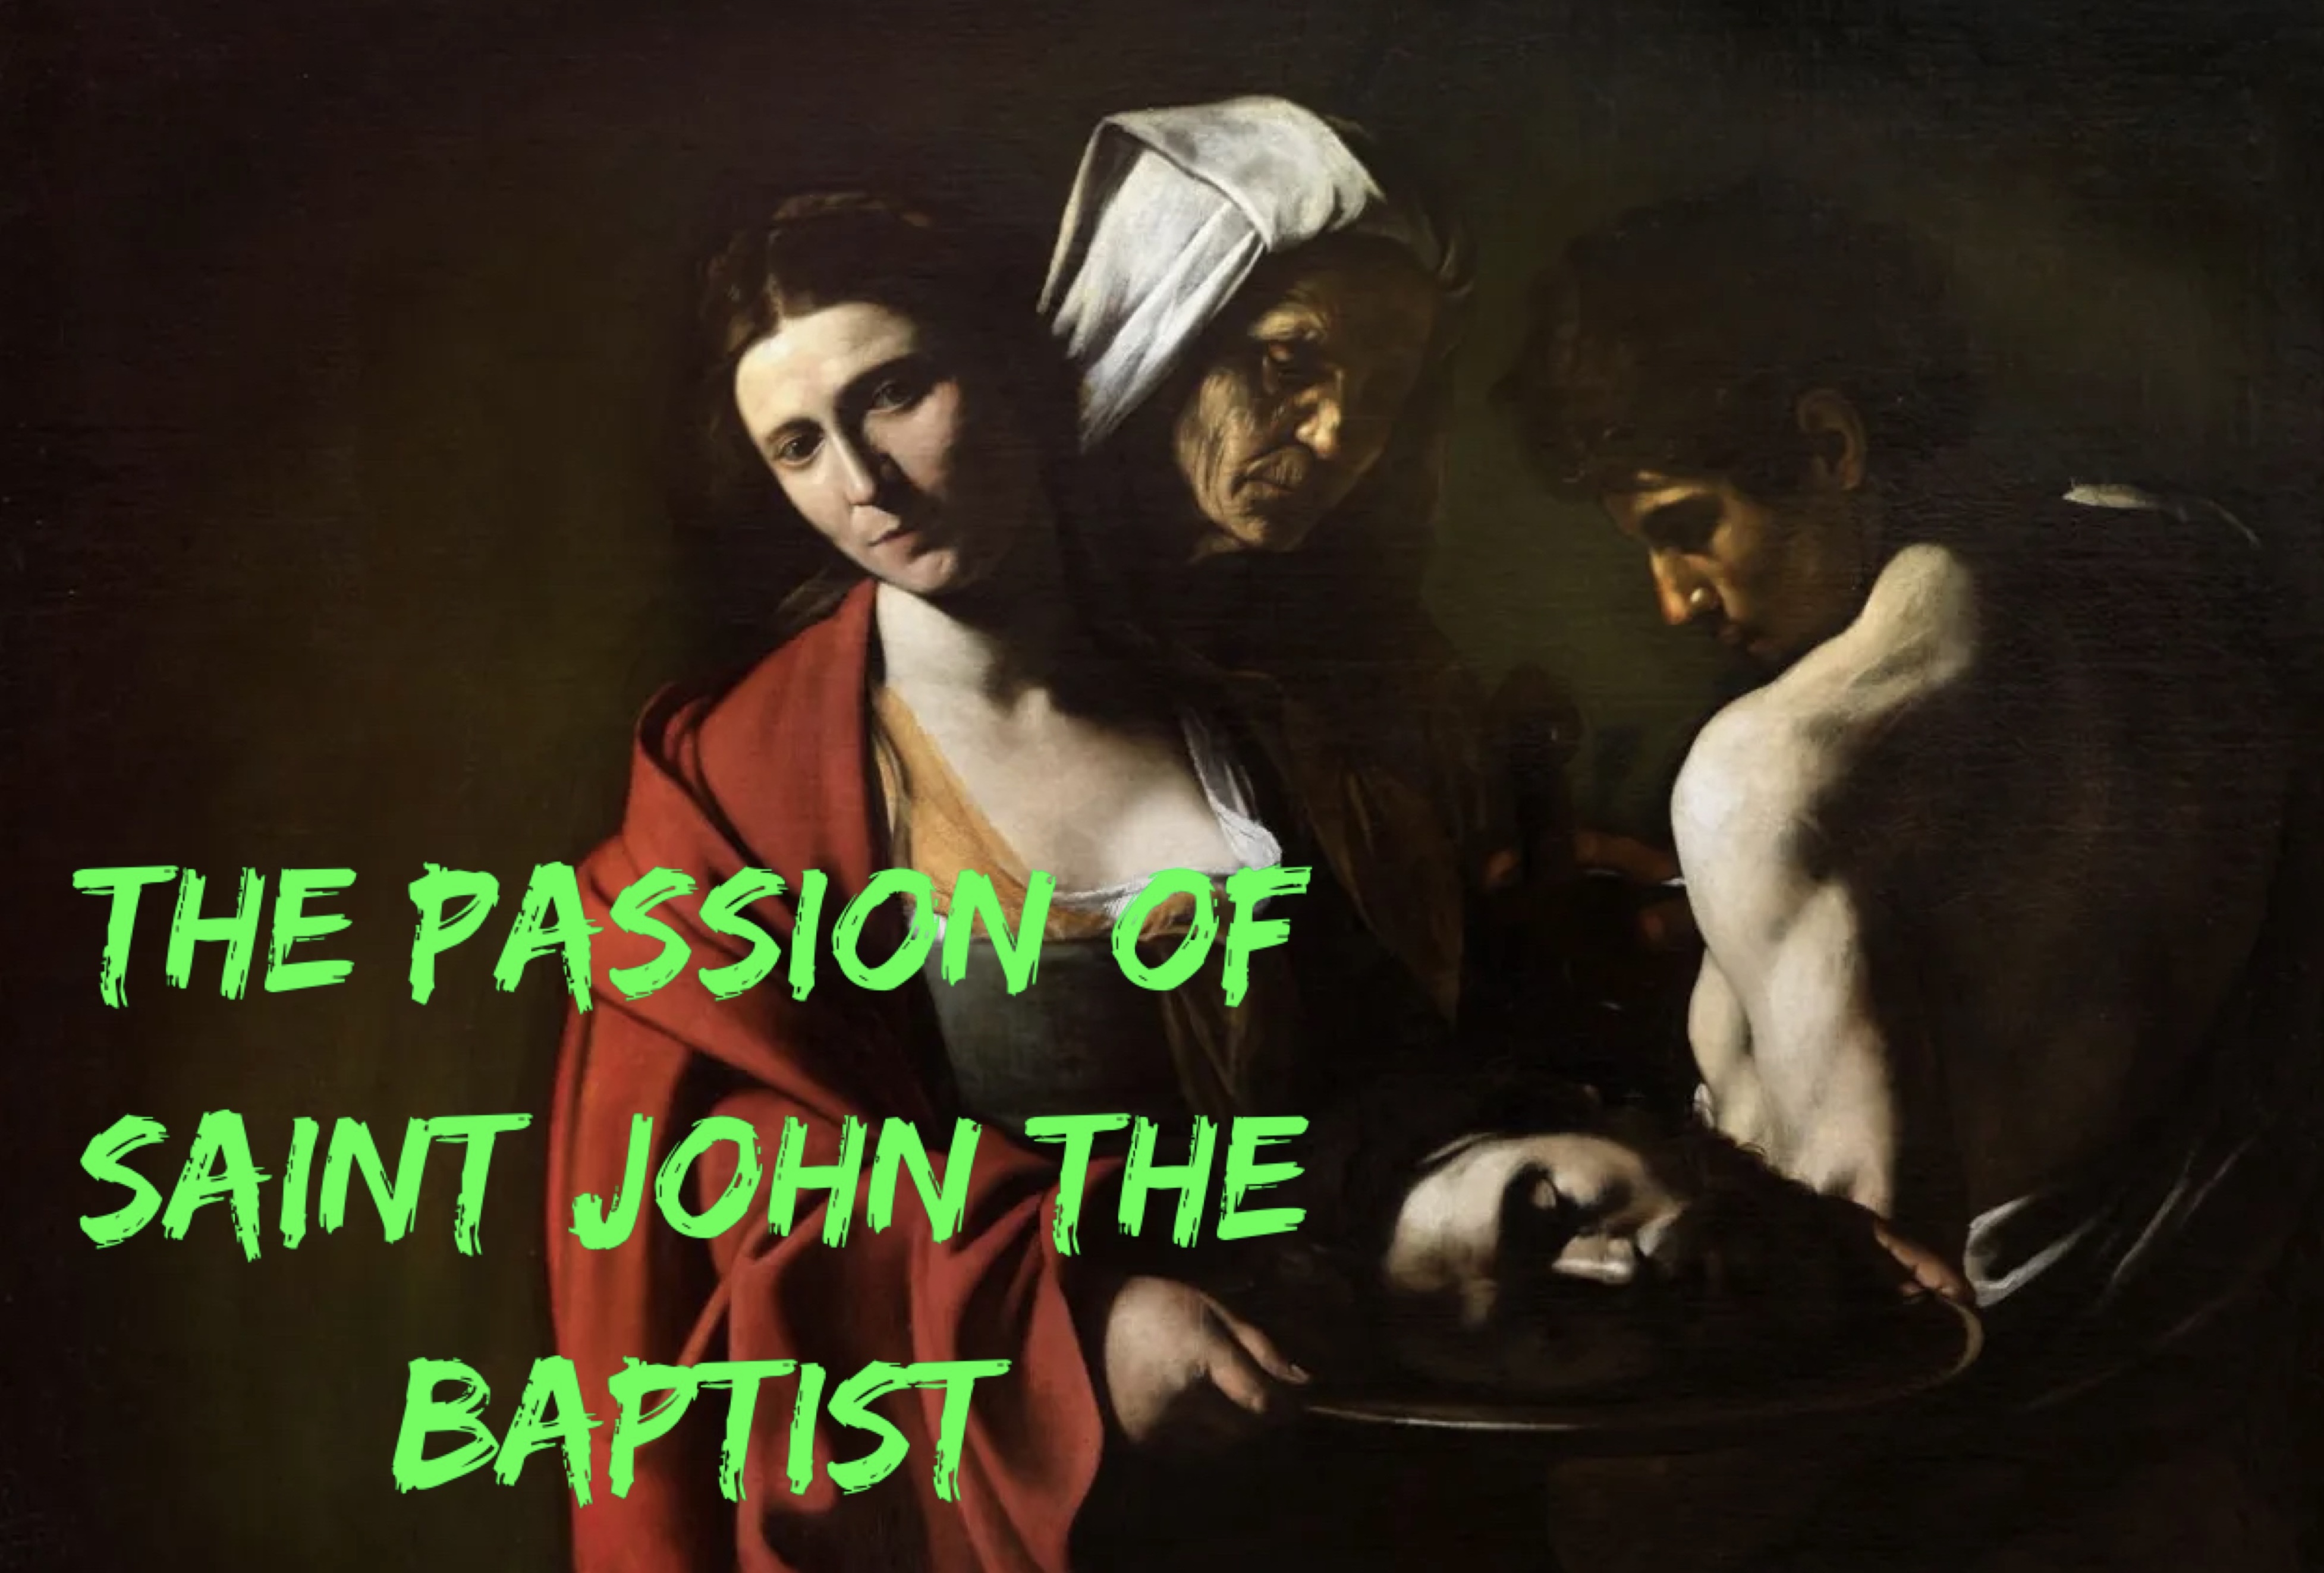 29th August - The Passion of Saint John the Baptist 